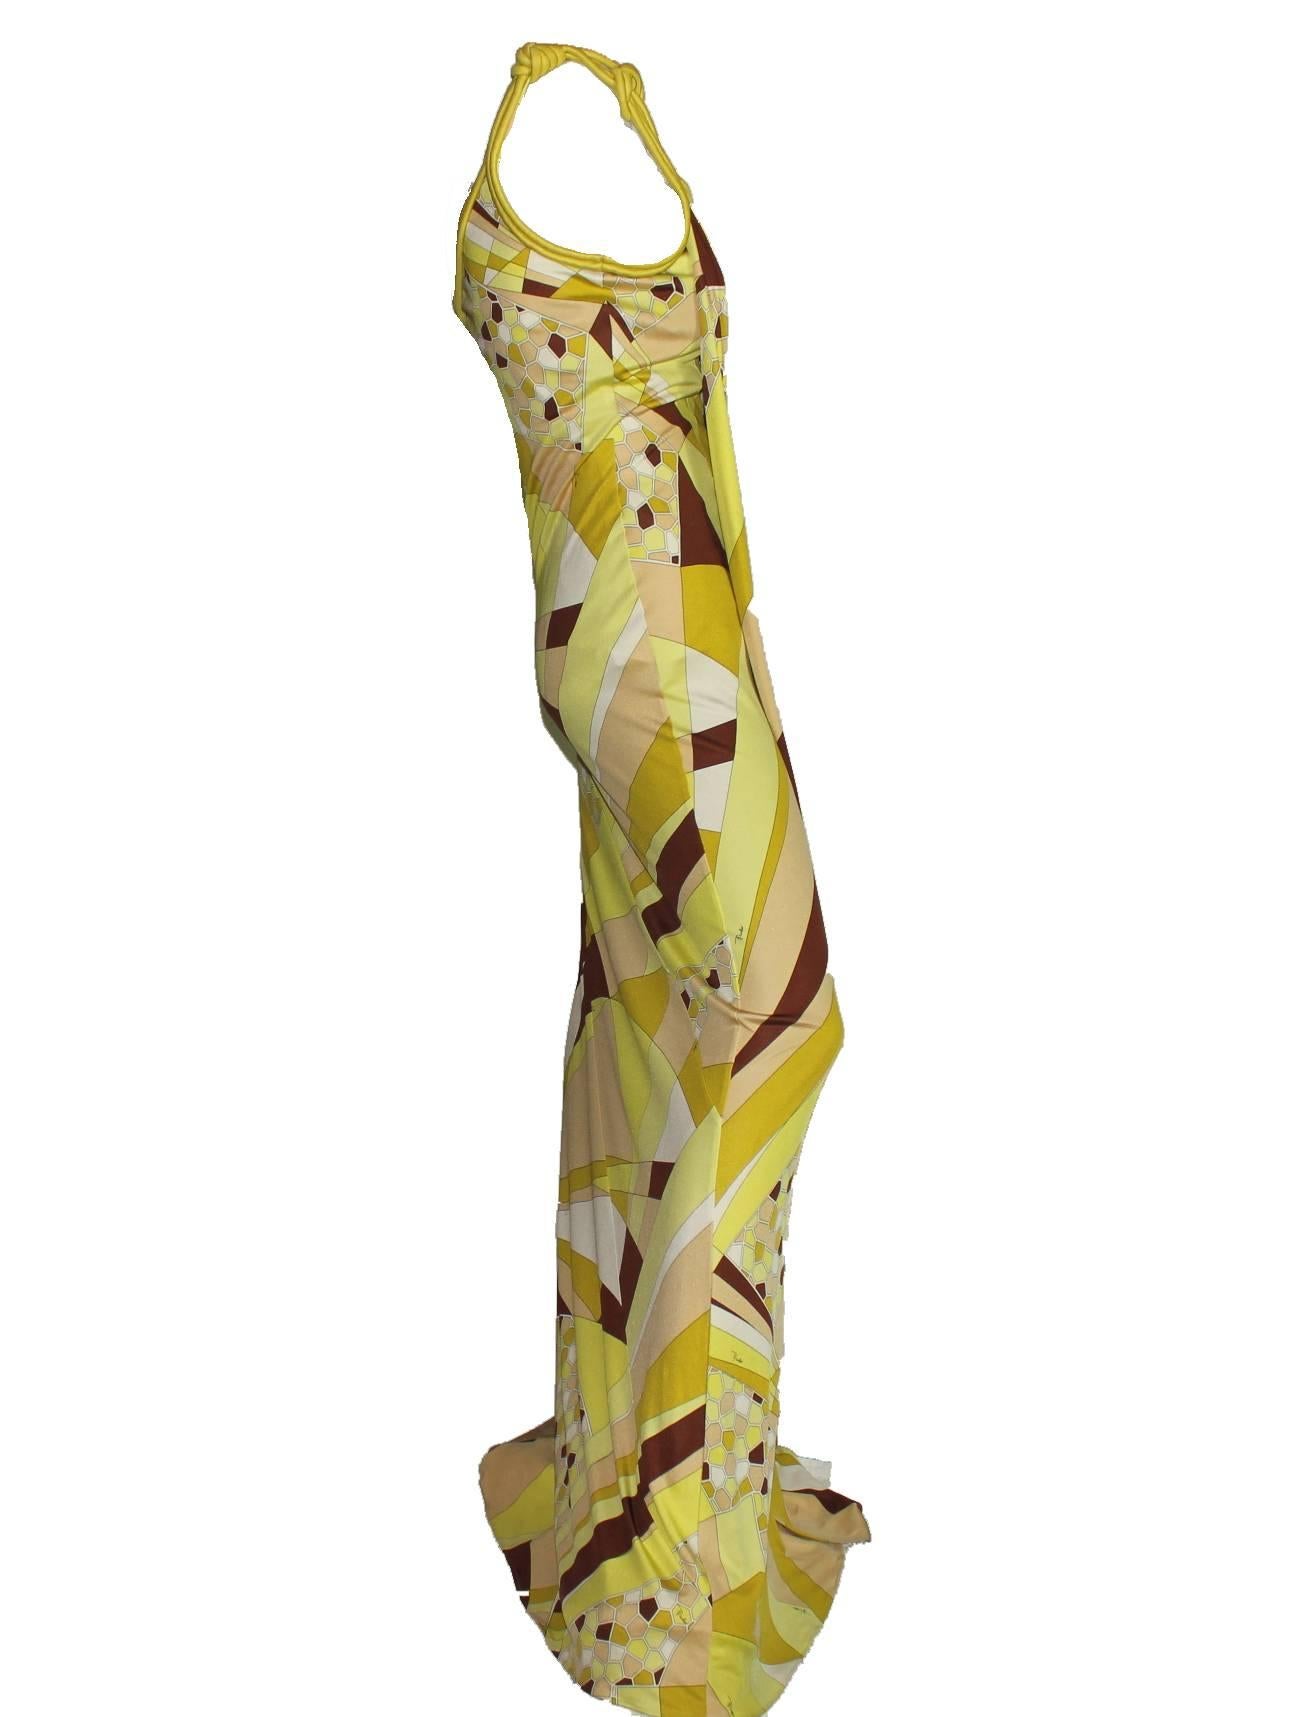 BEAUTIFUL FAMOUS EMILIO PUCCI MULTICOLOR PRING DRAPED MAXI GOWN DRESS

DETAILS:

    Beautiful multicolored silk in the famous PUCCI signature print
    Fabric signed discreetly with 